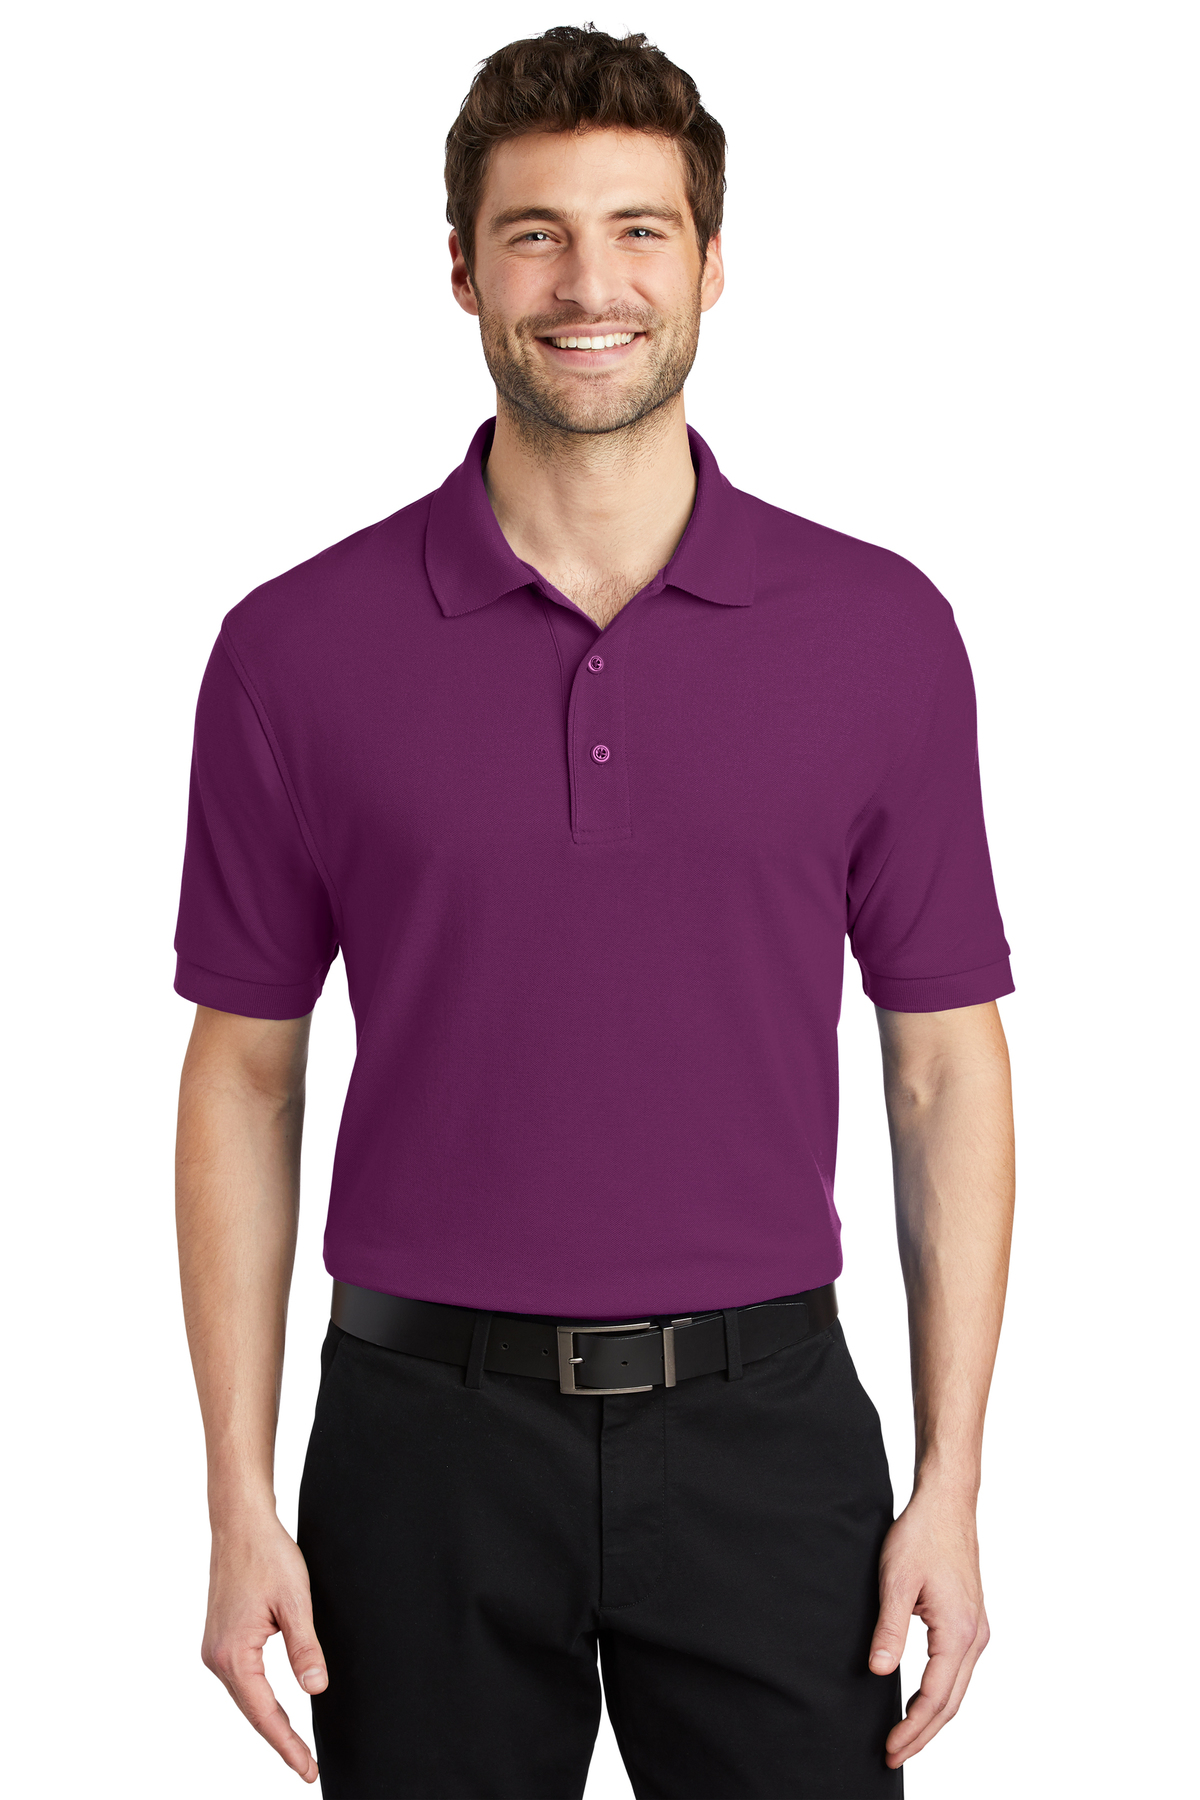 Port Authority Silk Touch Polo K500 Bright Lavender XS 